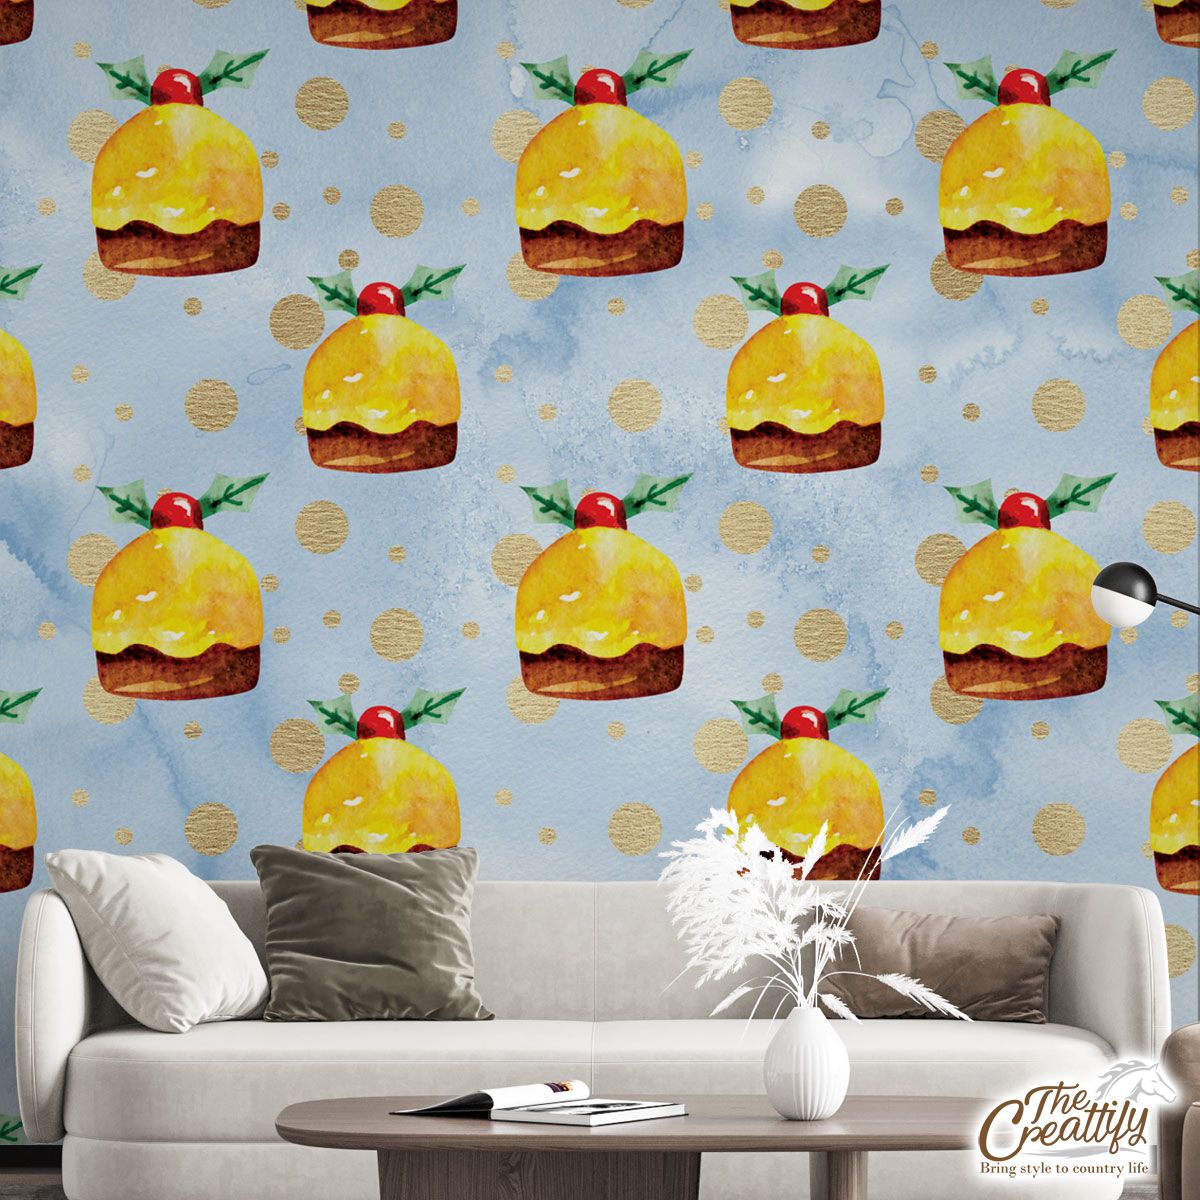 Christmas Cake With Holly Leaf Wall Mural